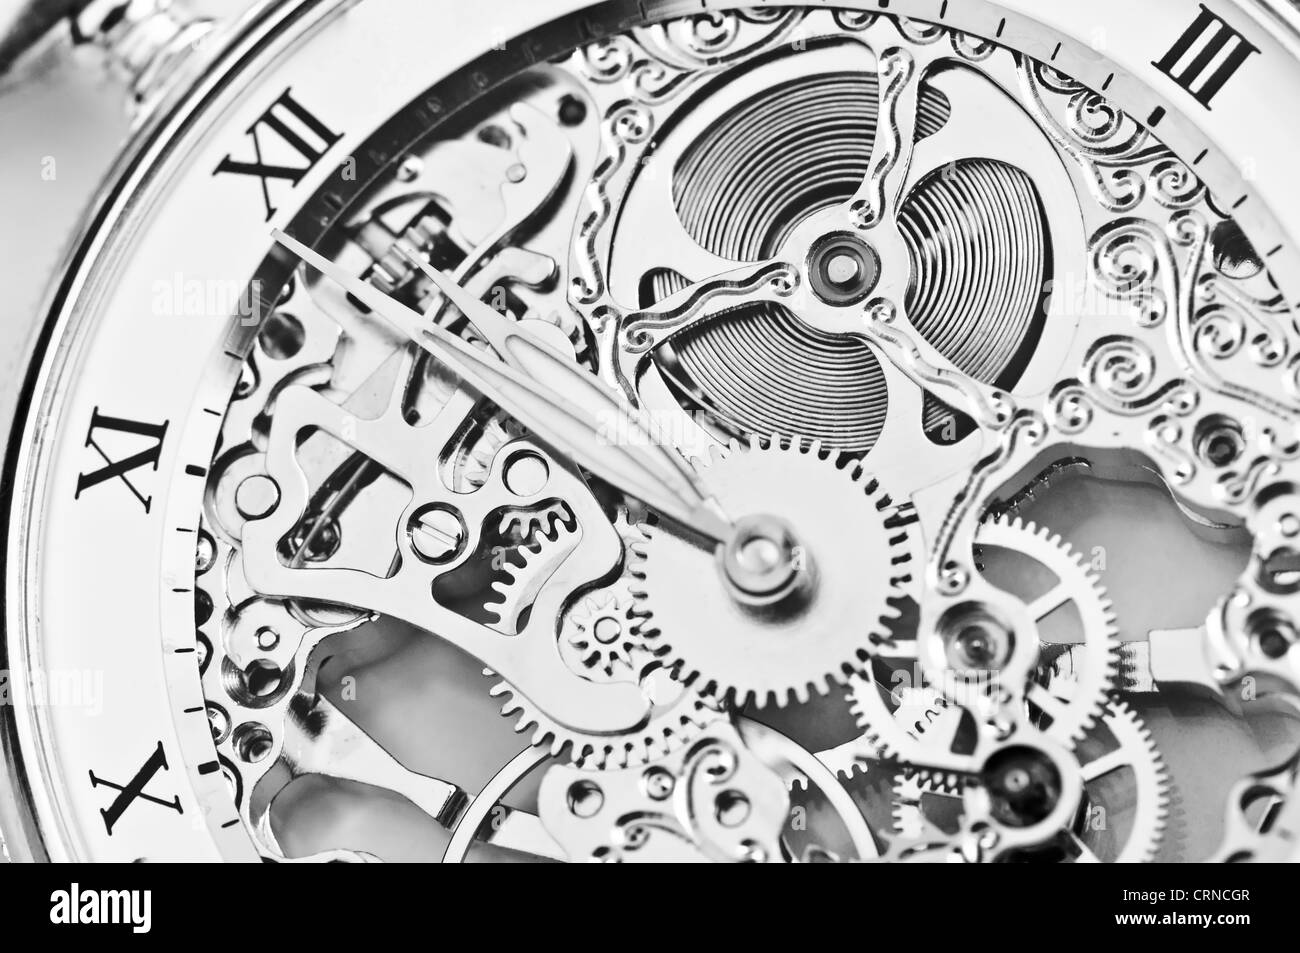 black and white close view of watch mechanism Stock Photo